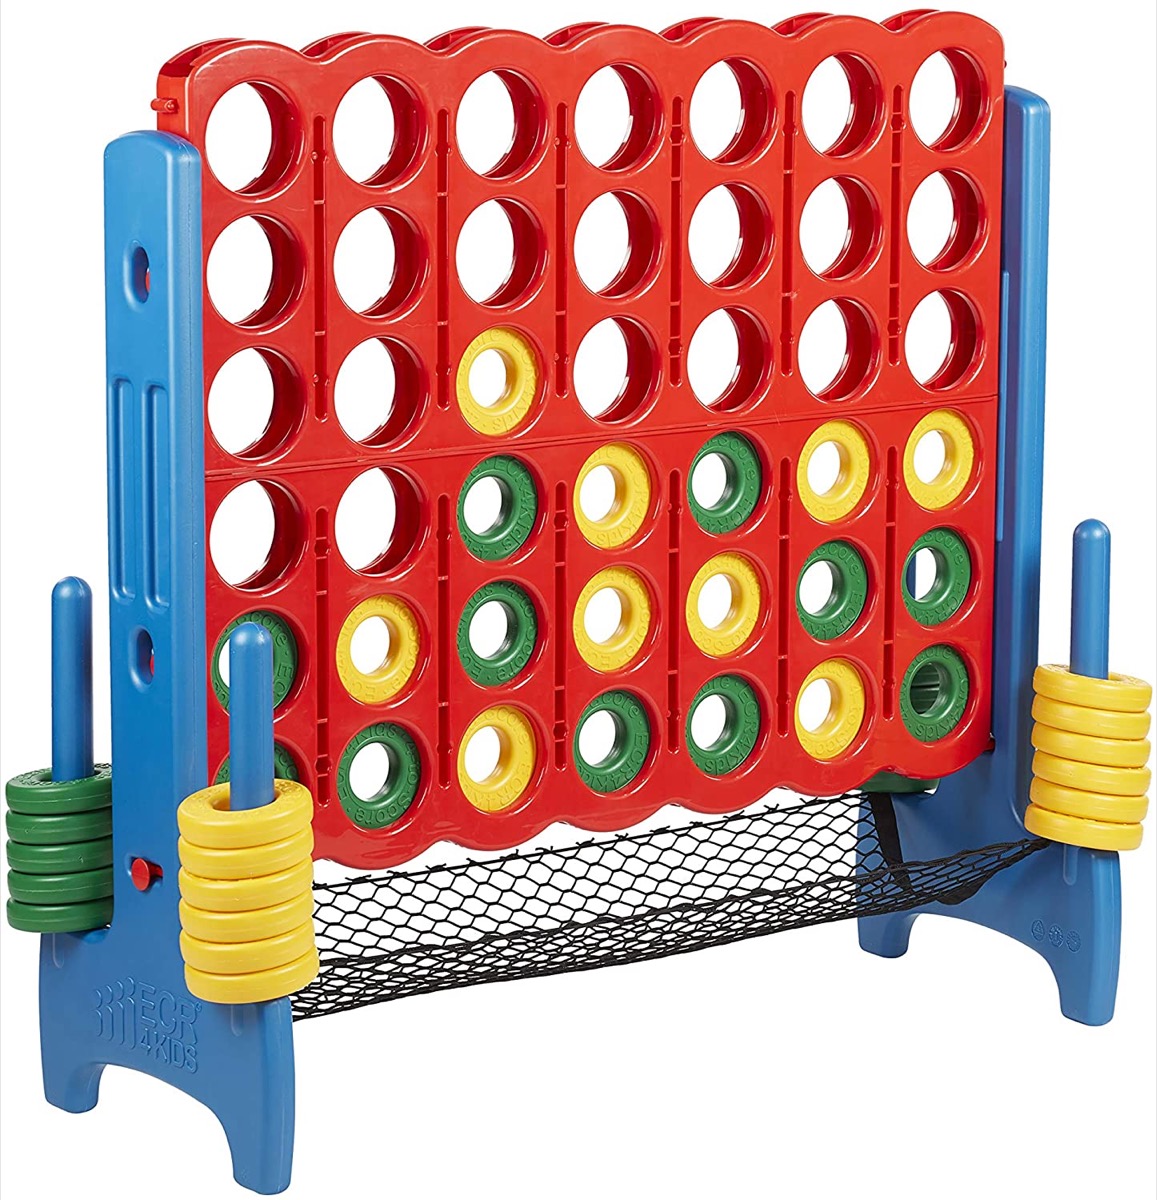 Jumbo sized connect four game